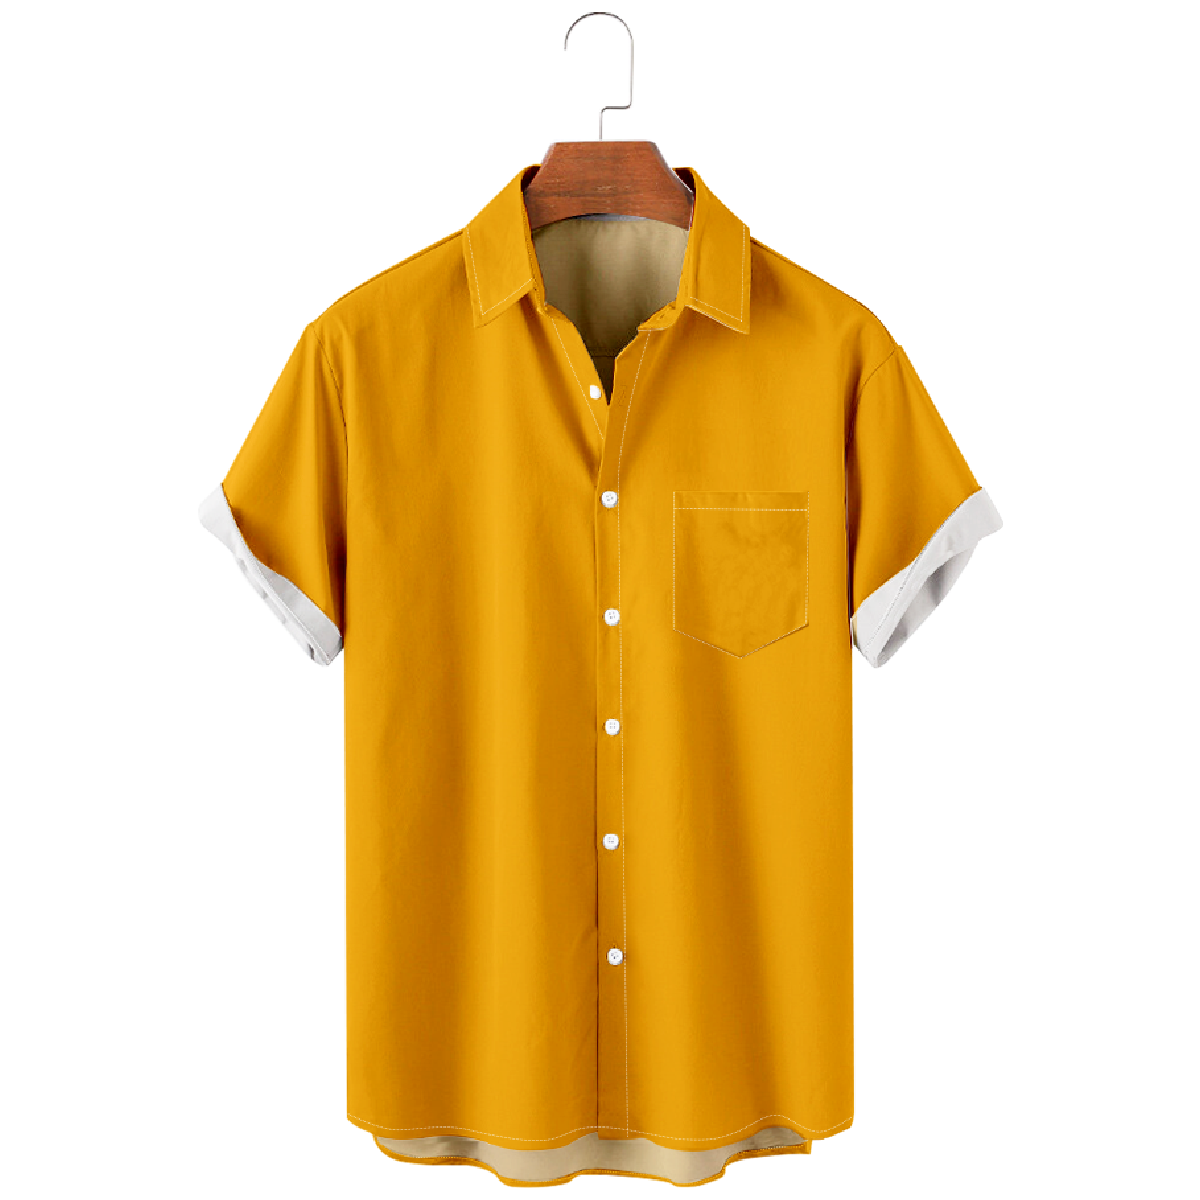 Pittsburgh Gold Button Up Shirt for Men Shirt with Front Pocket Short Sleeve